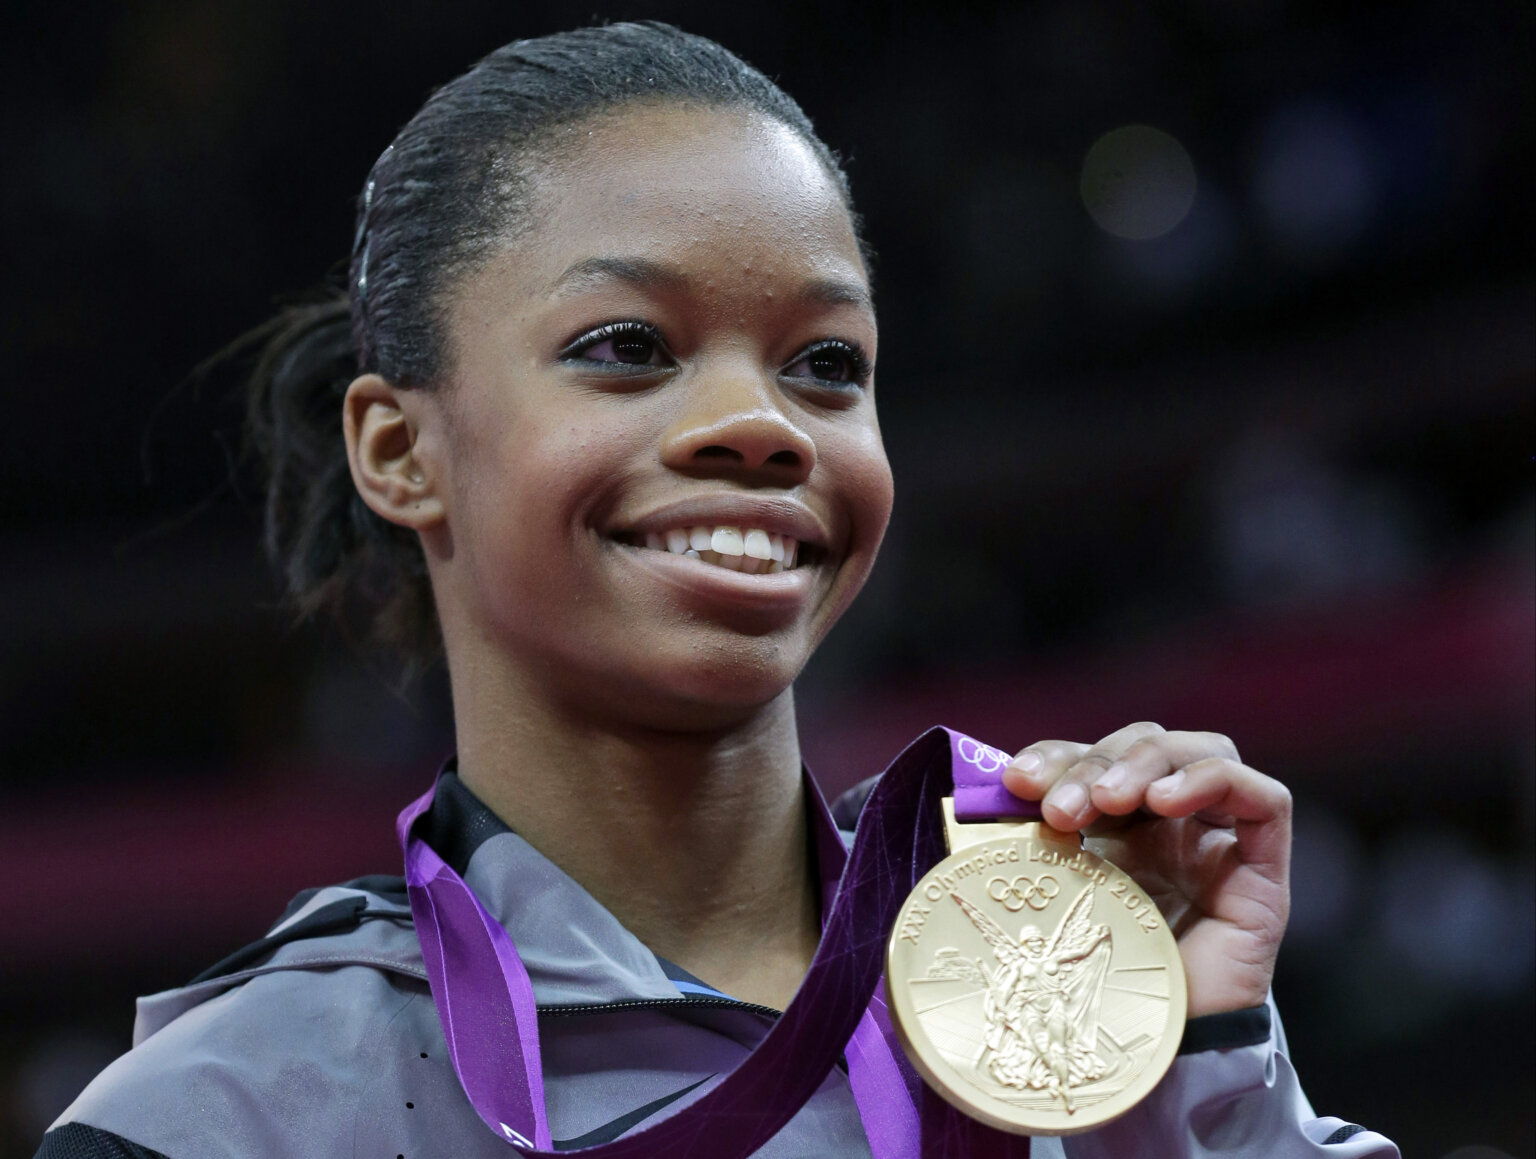 Olympic gymnastics champion Gabby Douglas says she is aiming for the